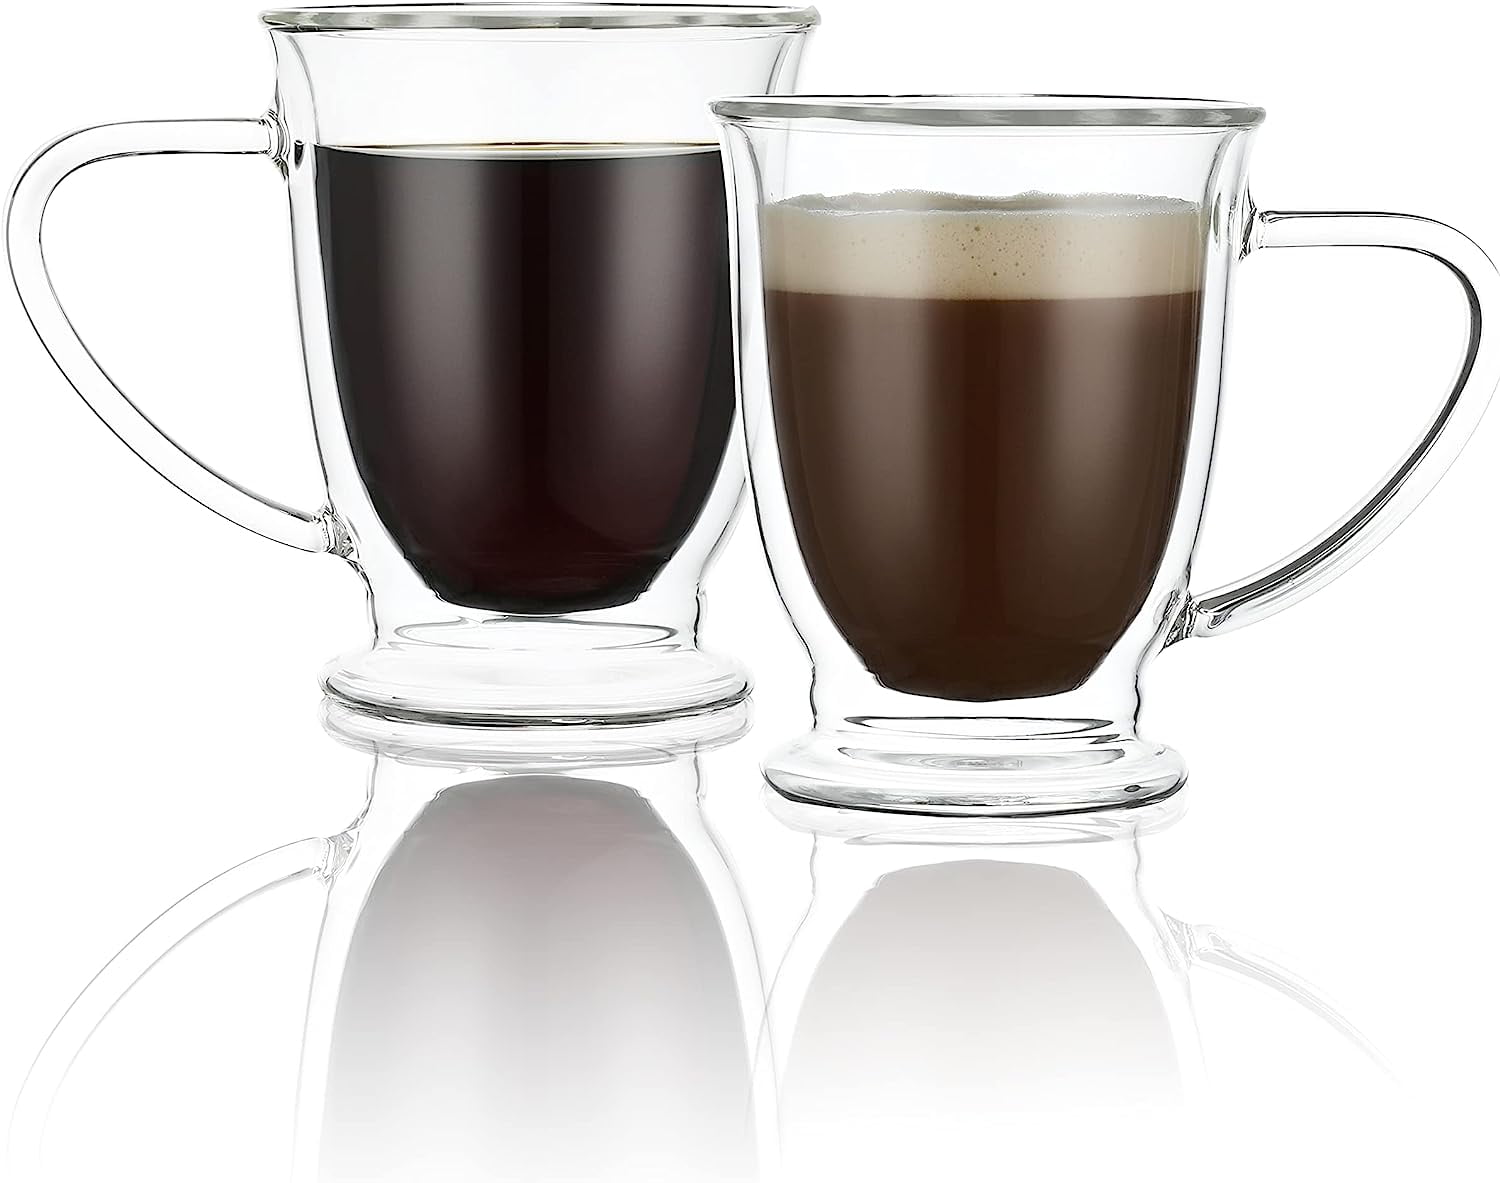 CnGlass Double Walled Glass Coffee Mugs 9.5oz,Irish Insulated Espresso Cups,Set  of 2 Clear Glasses Cappuccino Mug with Handle(Tea Latte Glassware) 